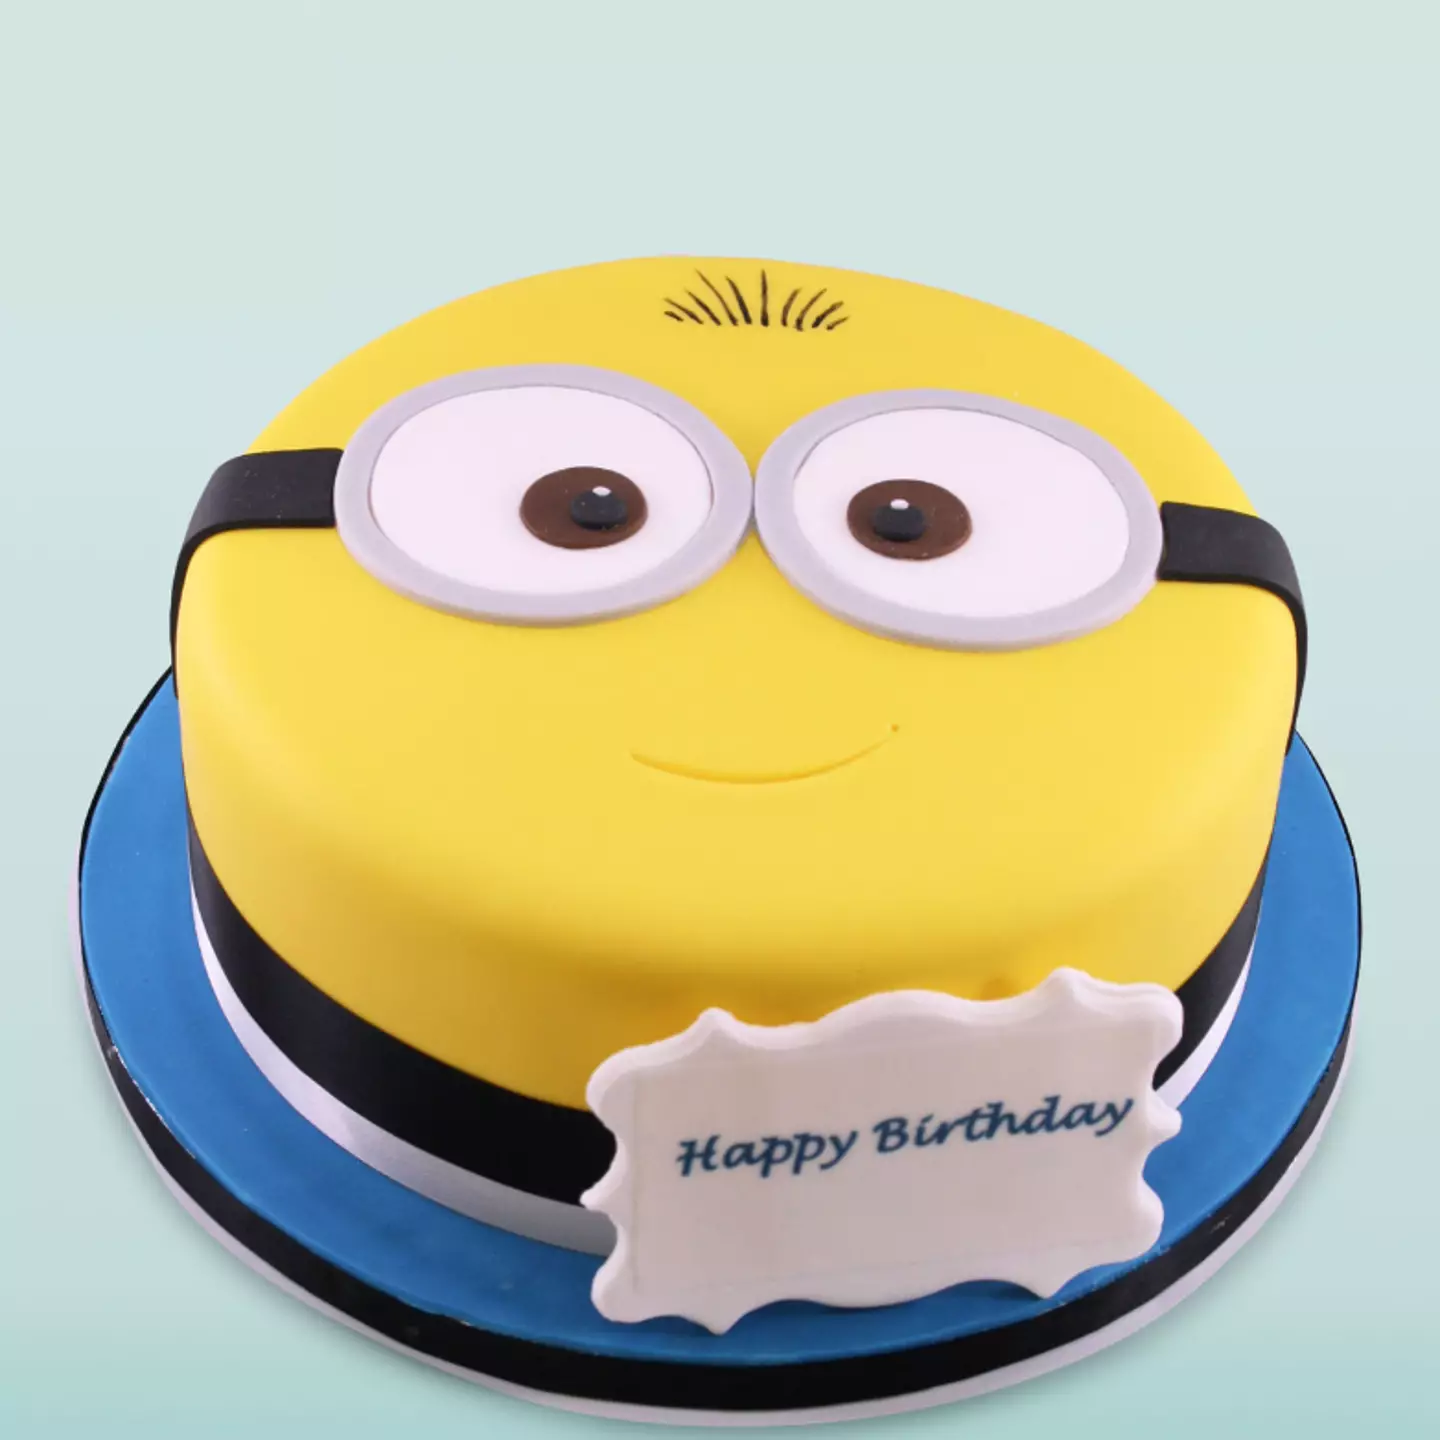 This is what one could reasonably expect a Minion cake to look like.